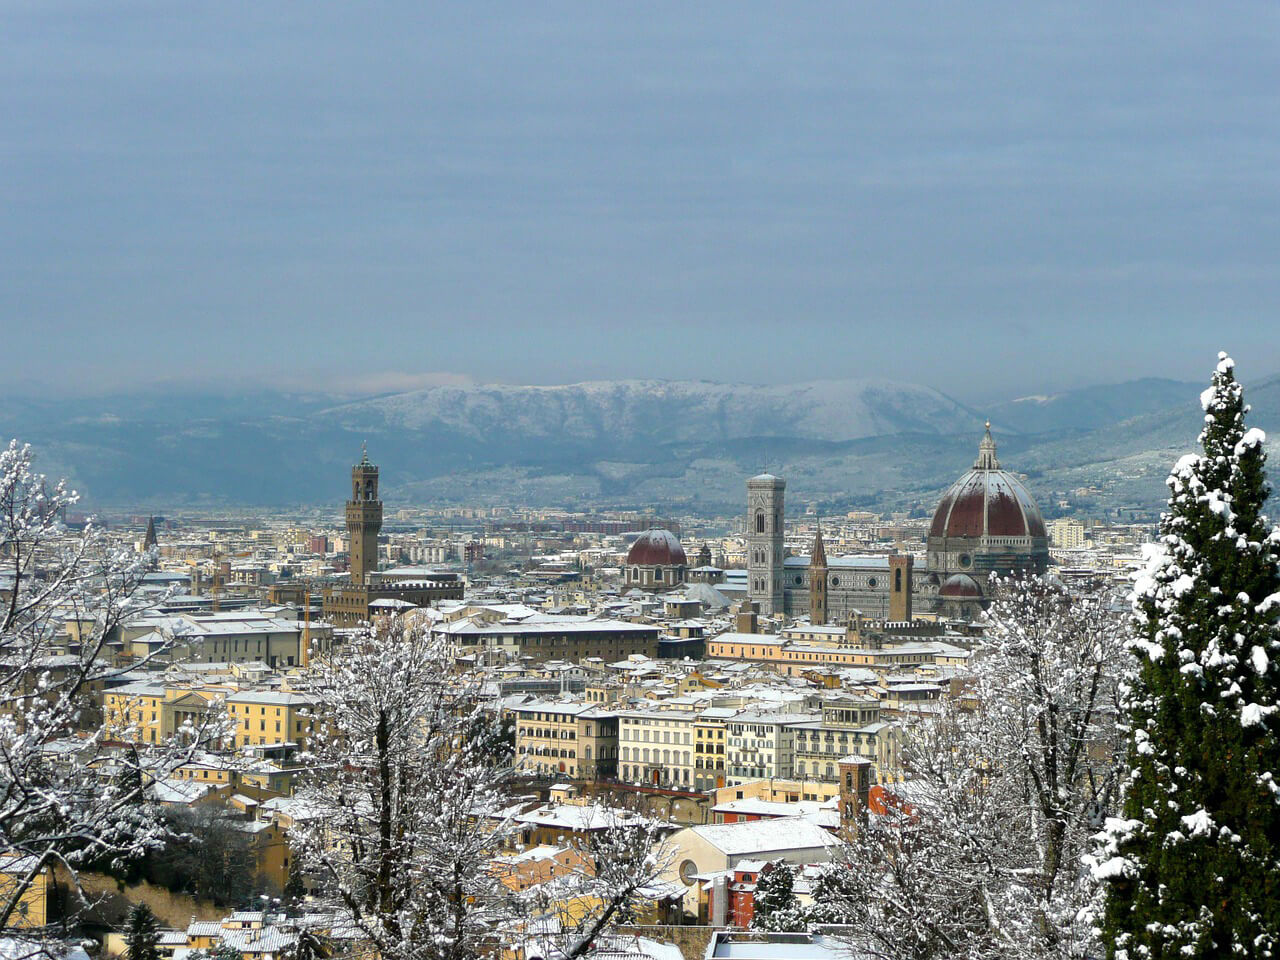 An overview of Florence in winter after a snowfall